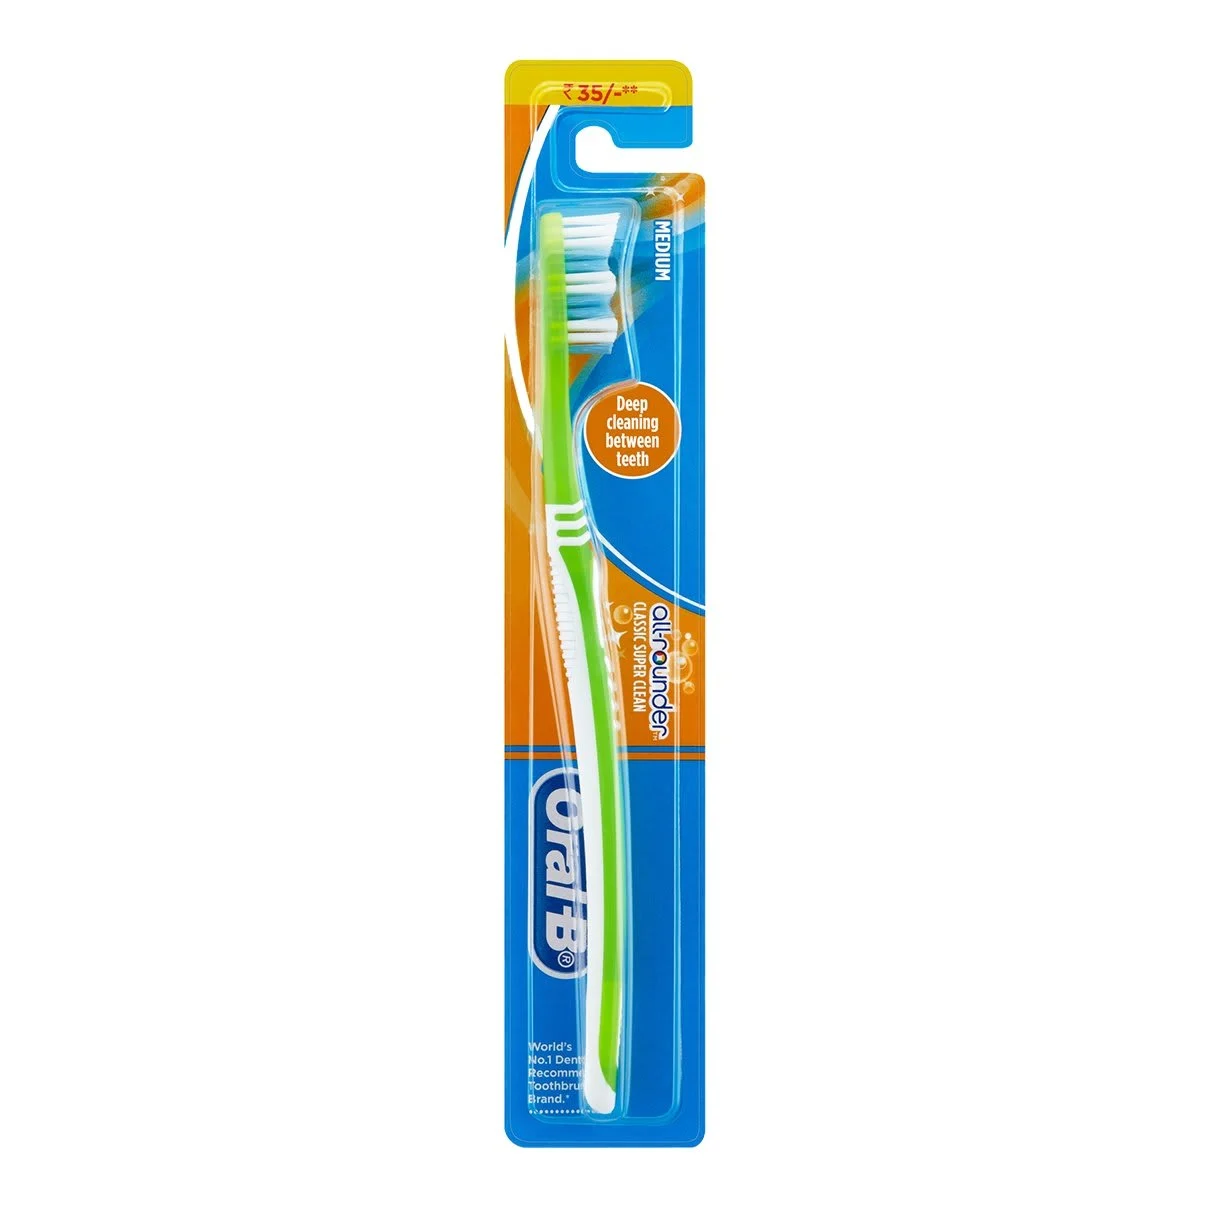 Oral-B Classic Super Clean Manual Toothbrush 